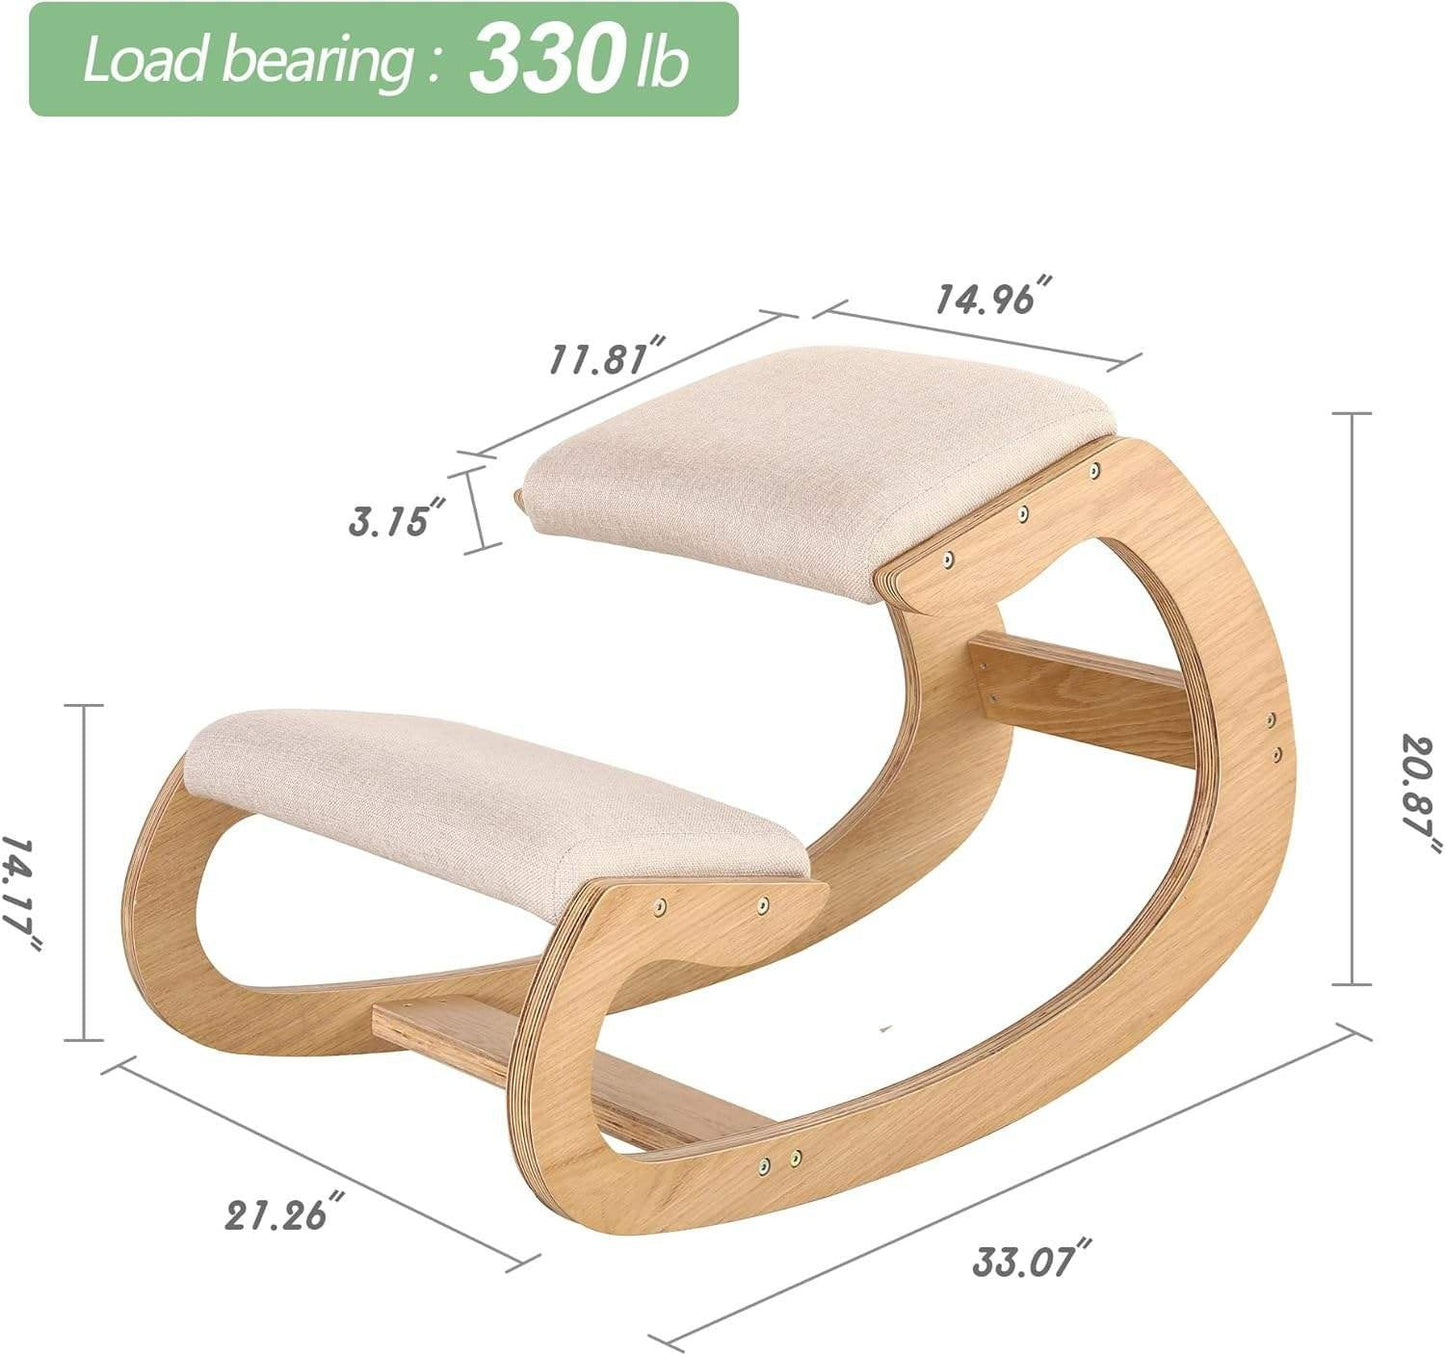 Ergonomic Wooden Kneeling Chair - Upright Posture Chair for Home Office Meditation, Wooden & Linen Cushion